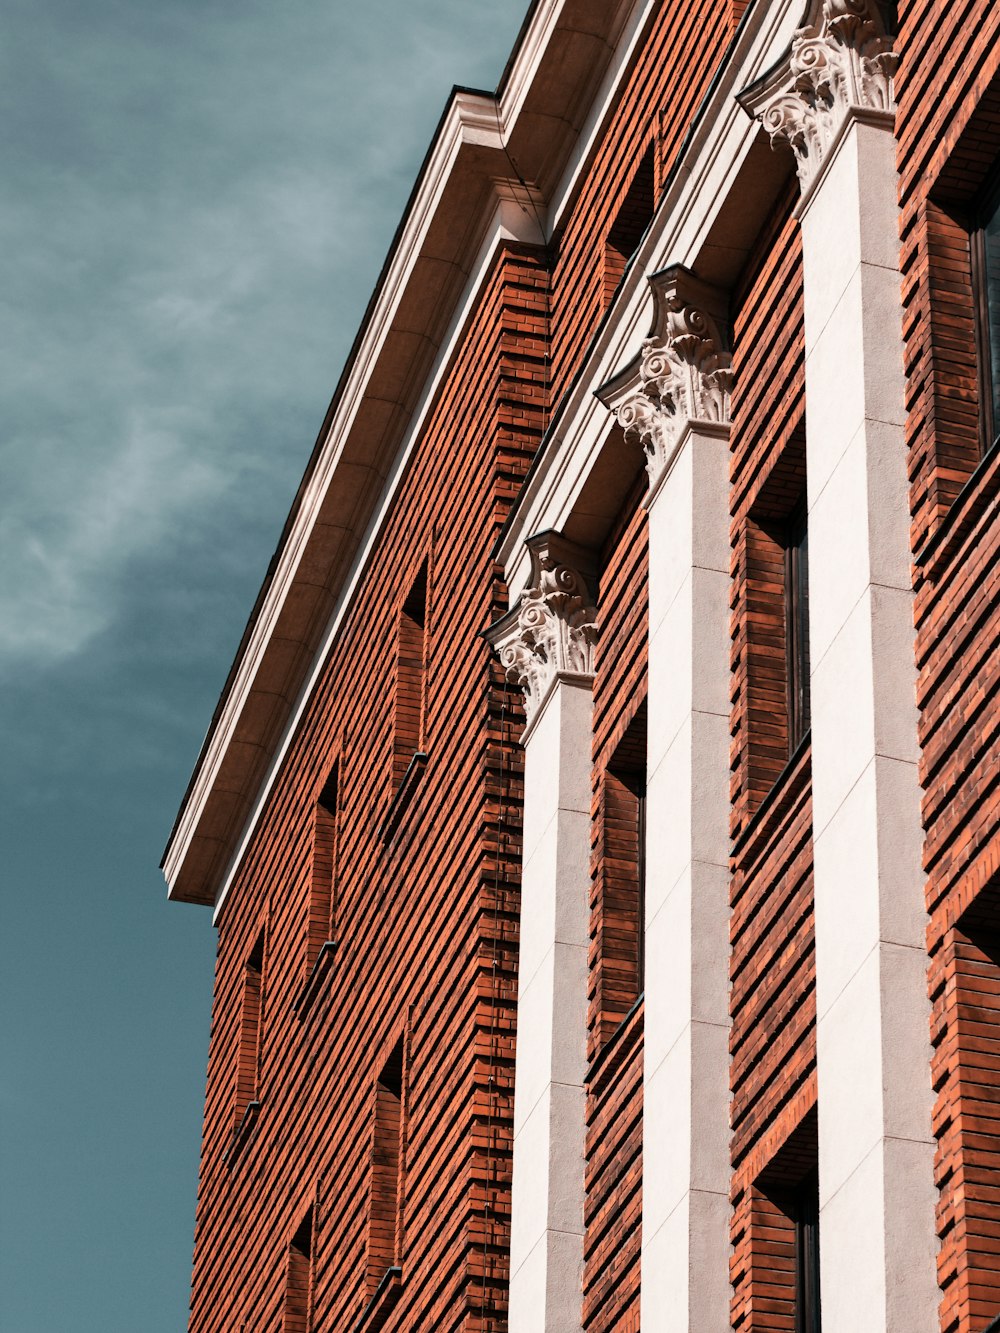 a tall red brick building with white columns